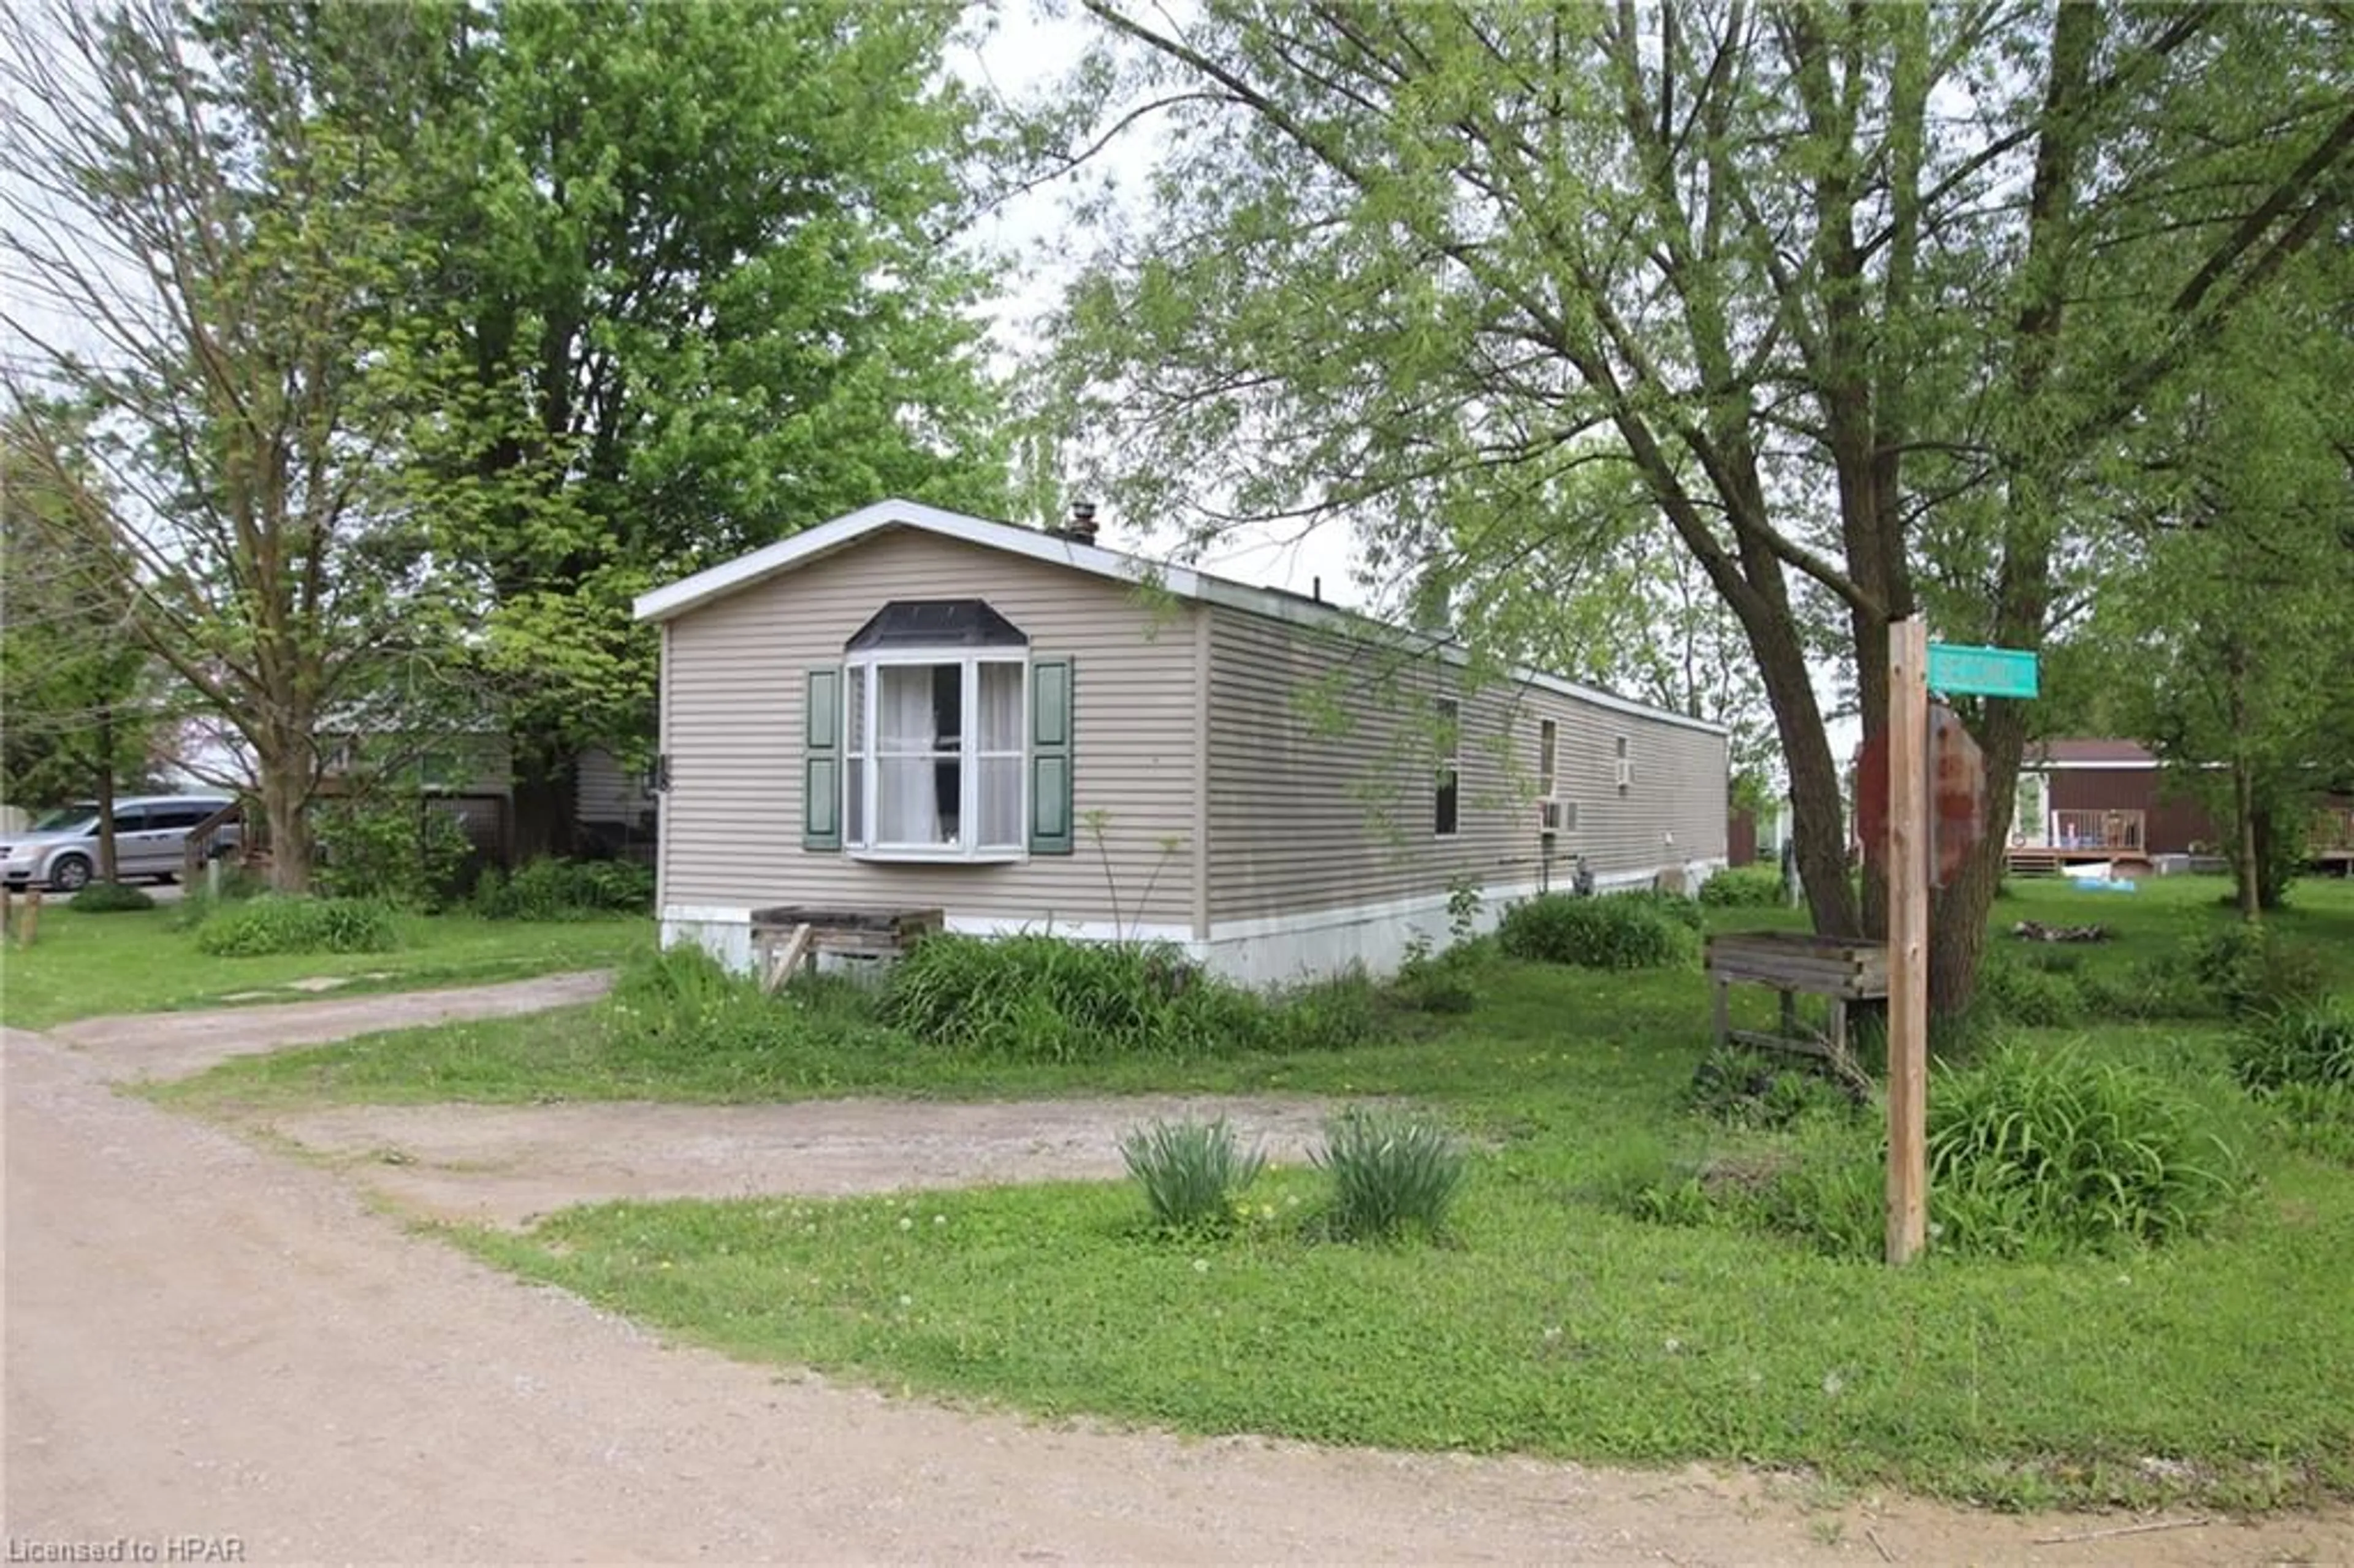 Cottage for 75049 Hensall Rd #18, Seaforth Ontario N0K 1W0